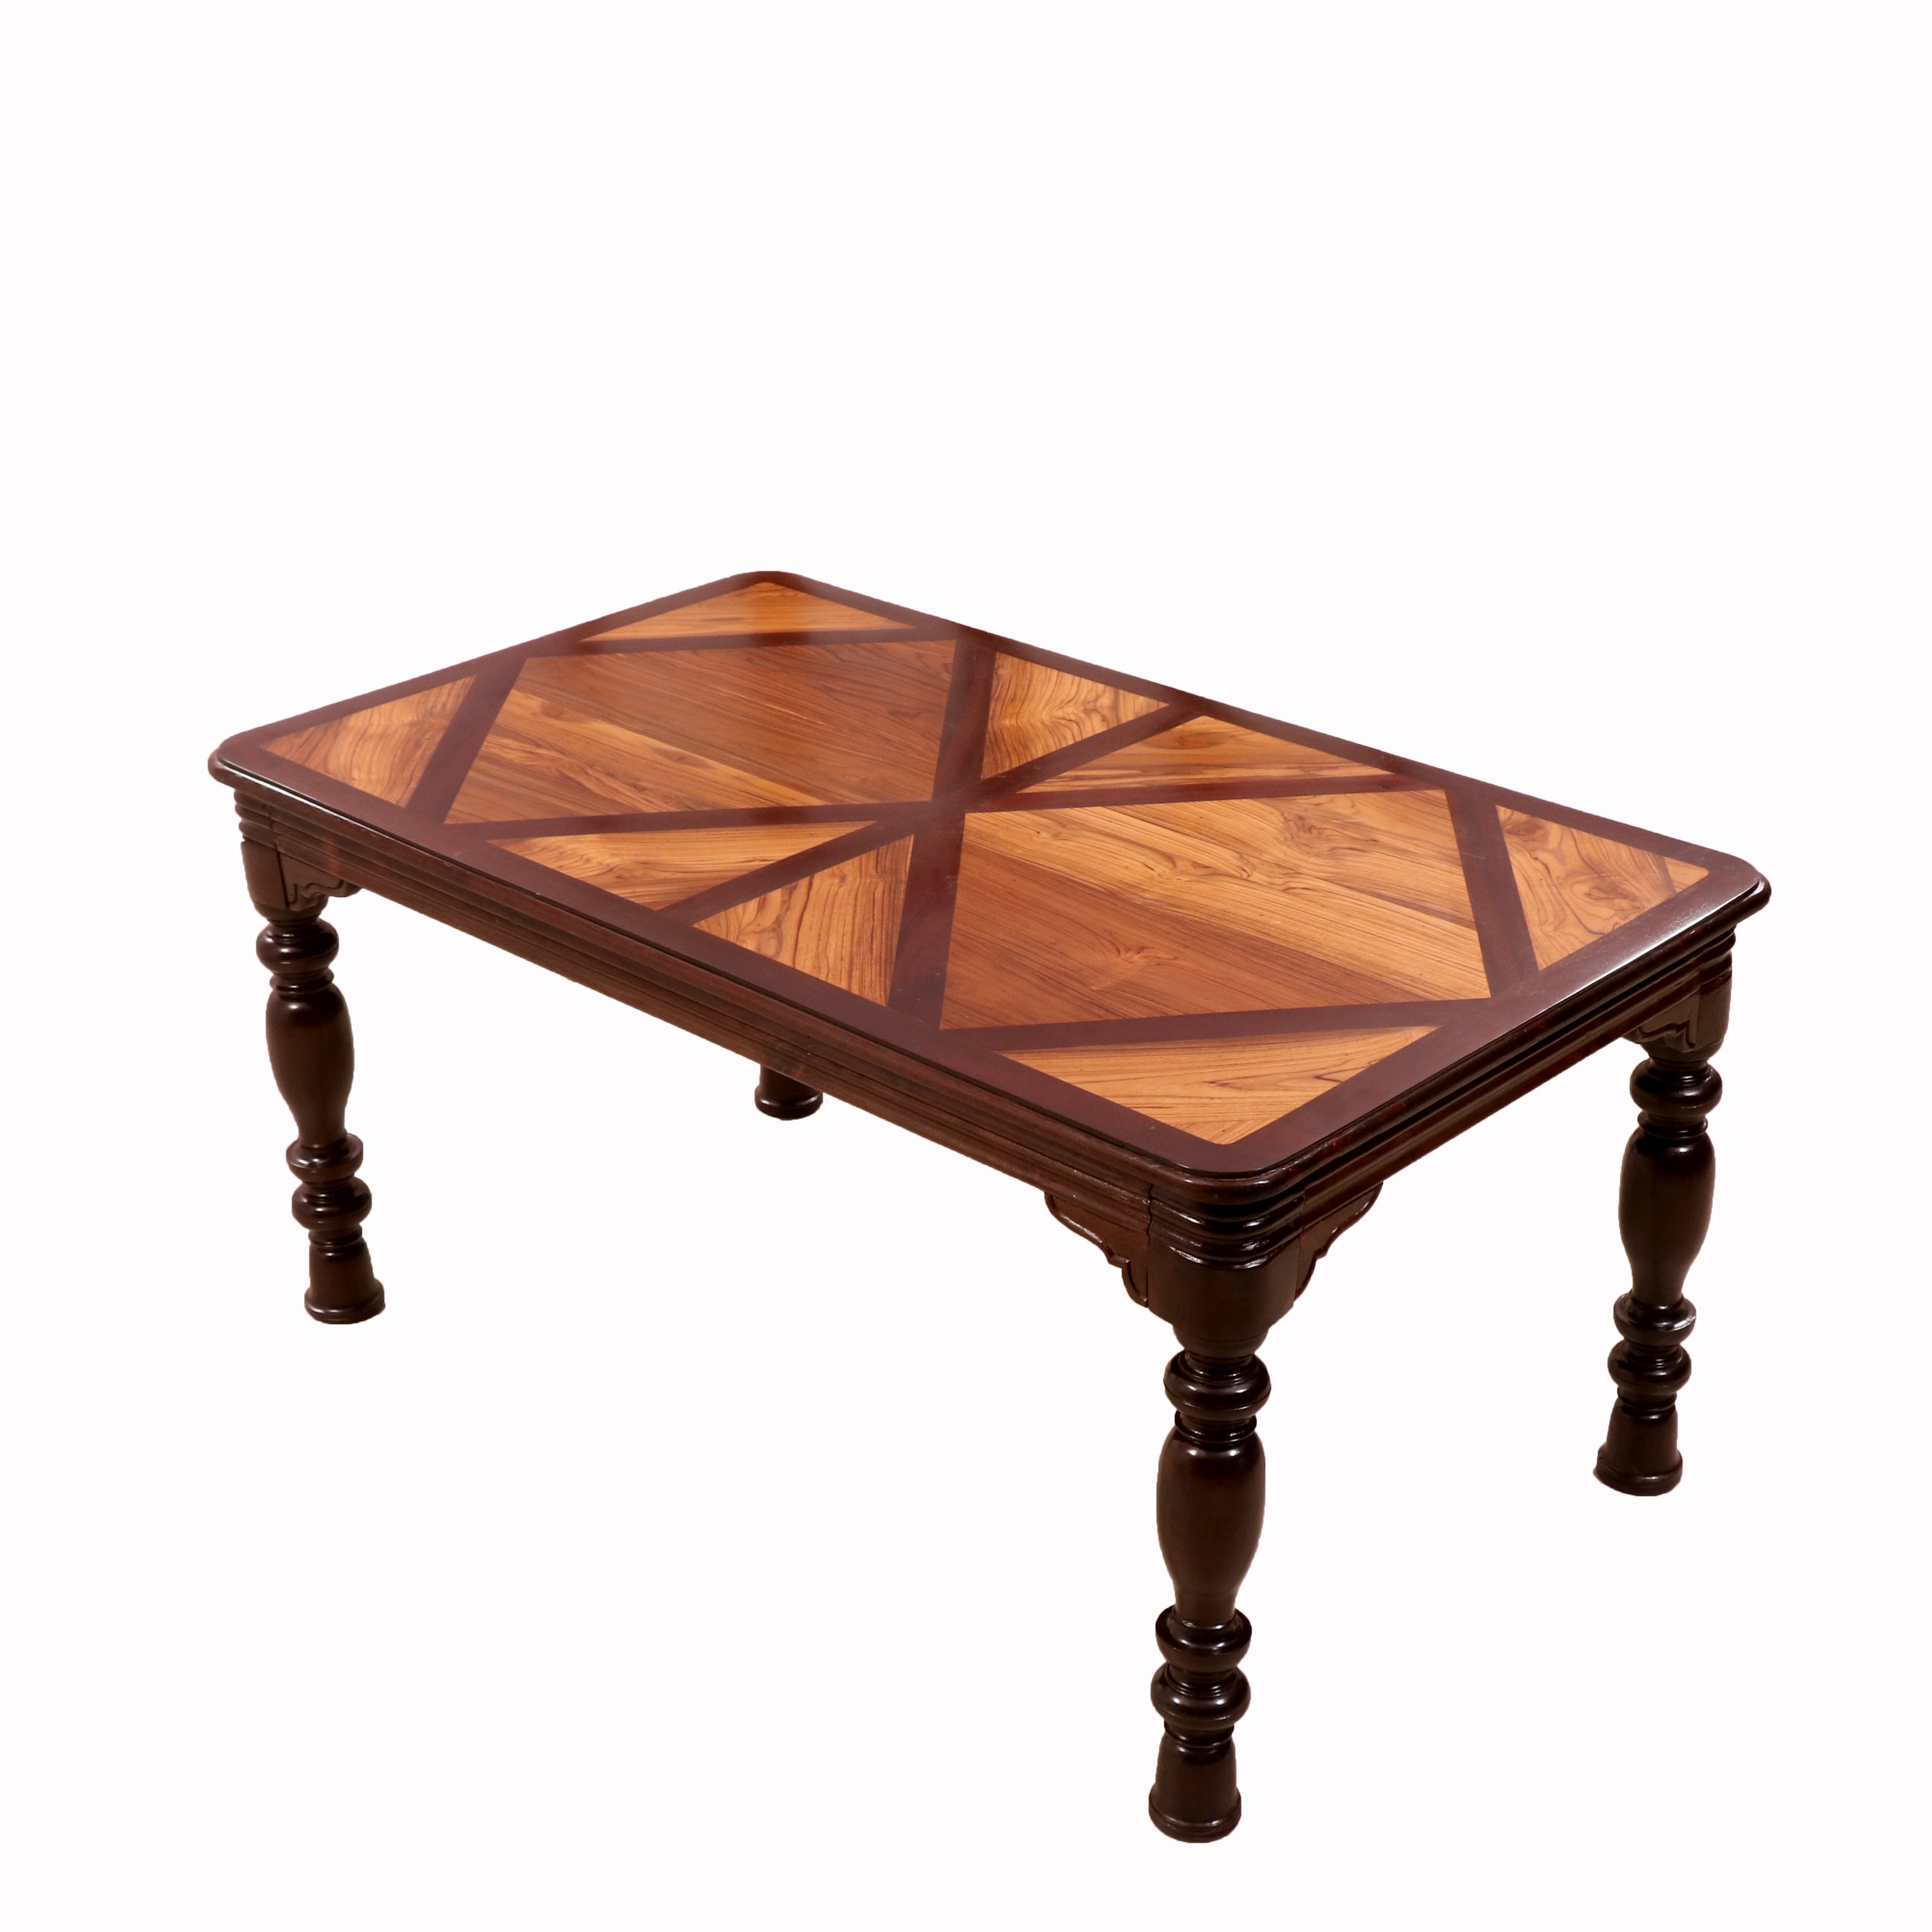 Double Diamond Indian Teak Wood Dining Table Dining Table